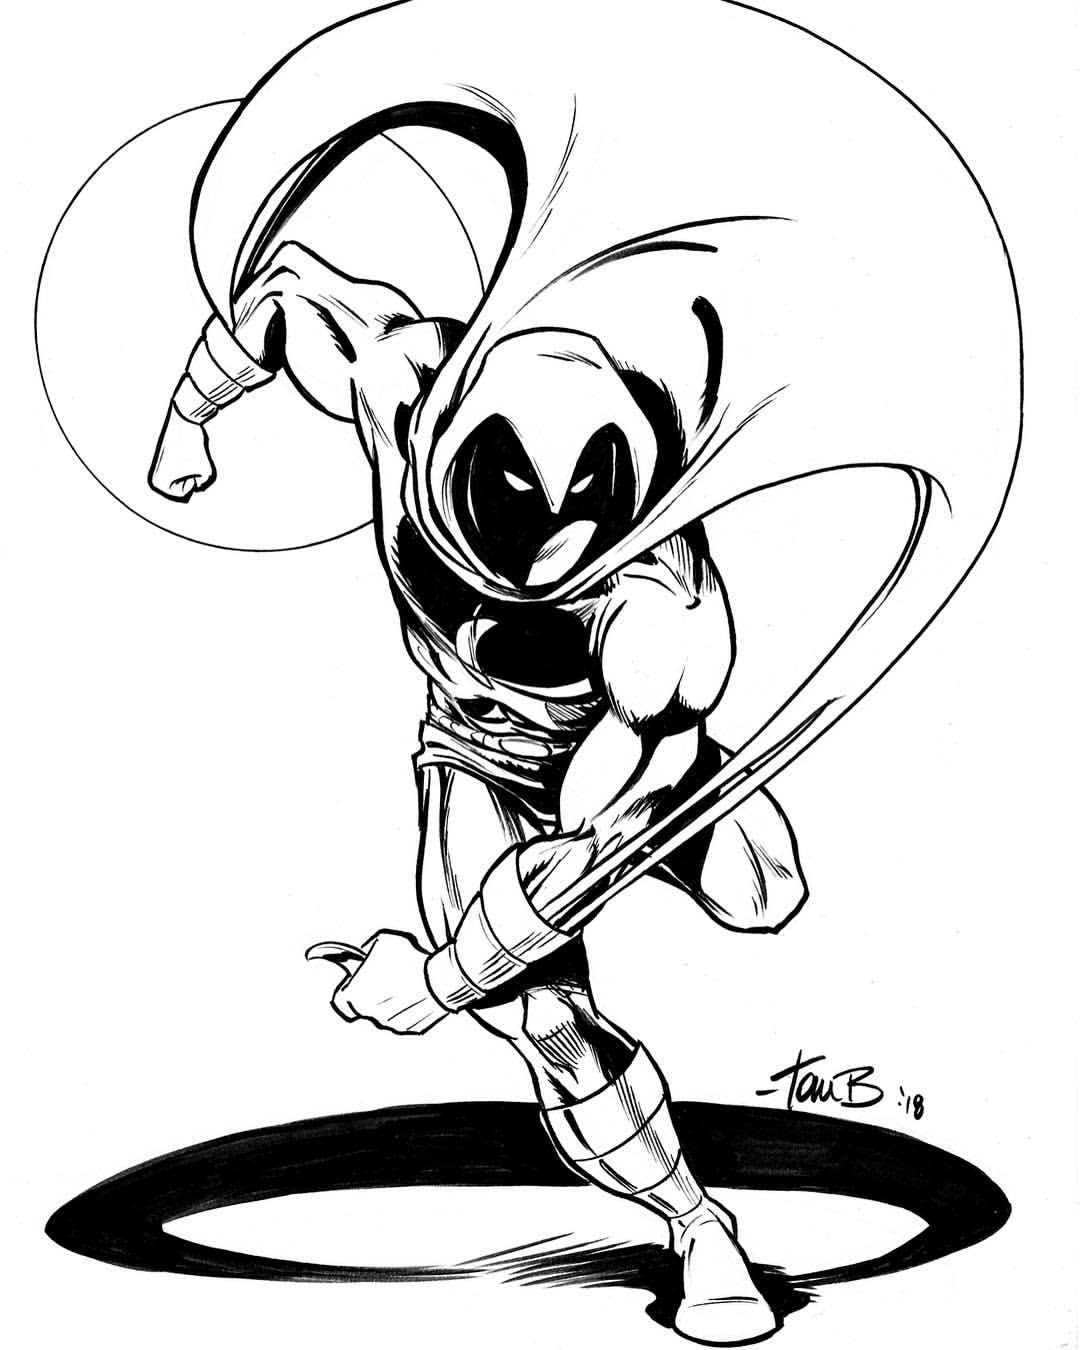 Moon Knight Coloring Pages